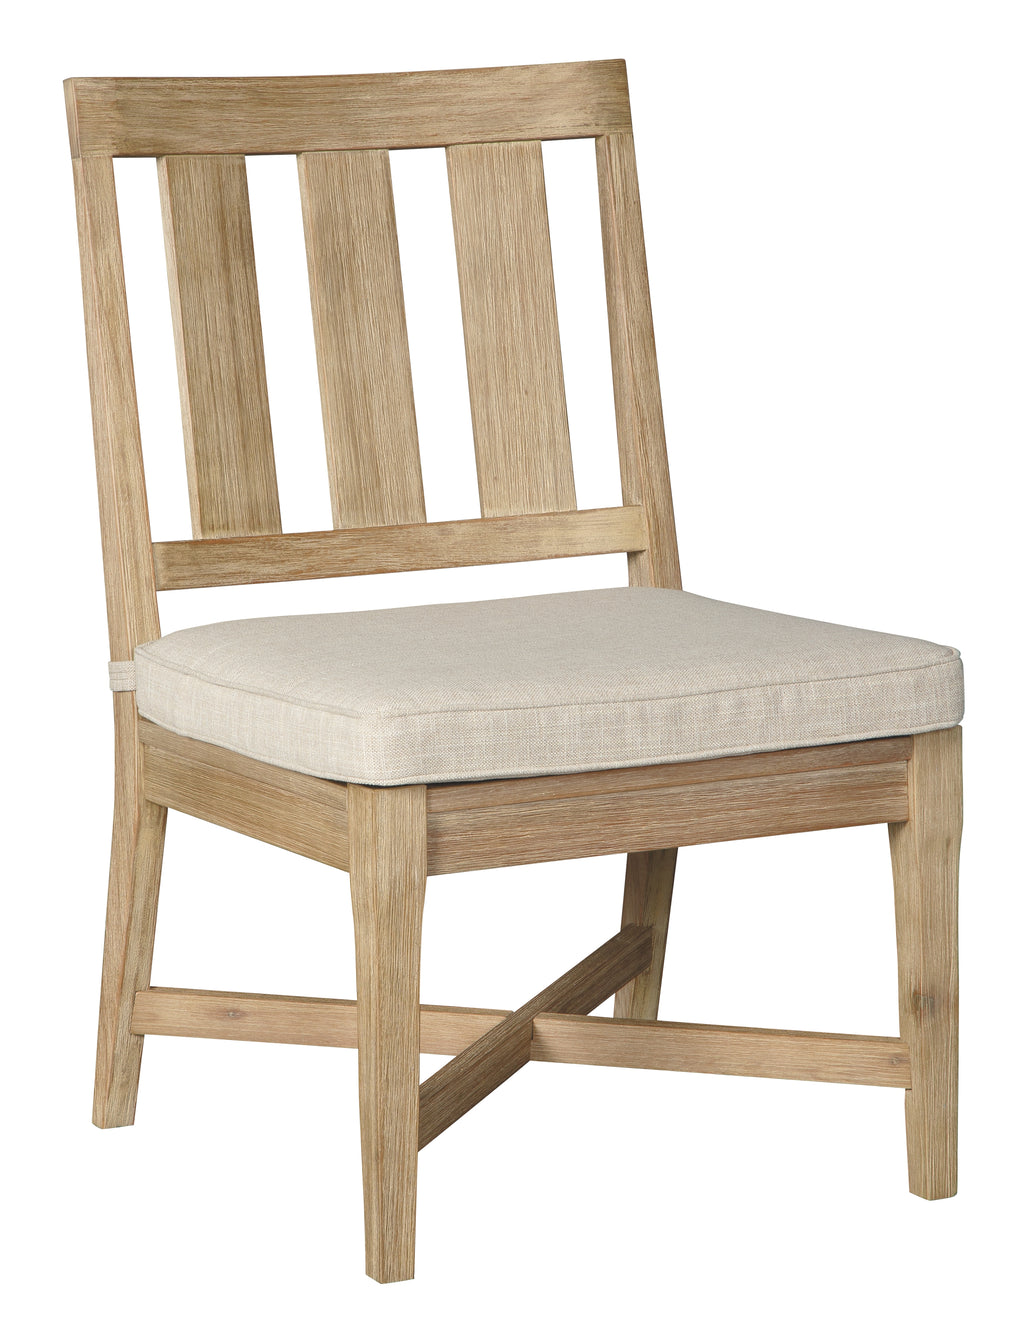 Clare View P801-601 Beige Chair with Cushion 2CN